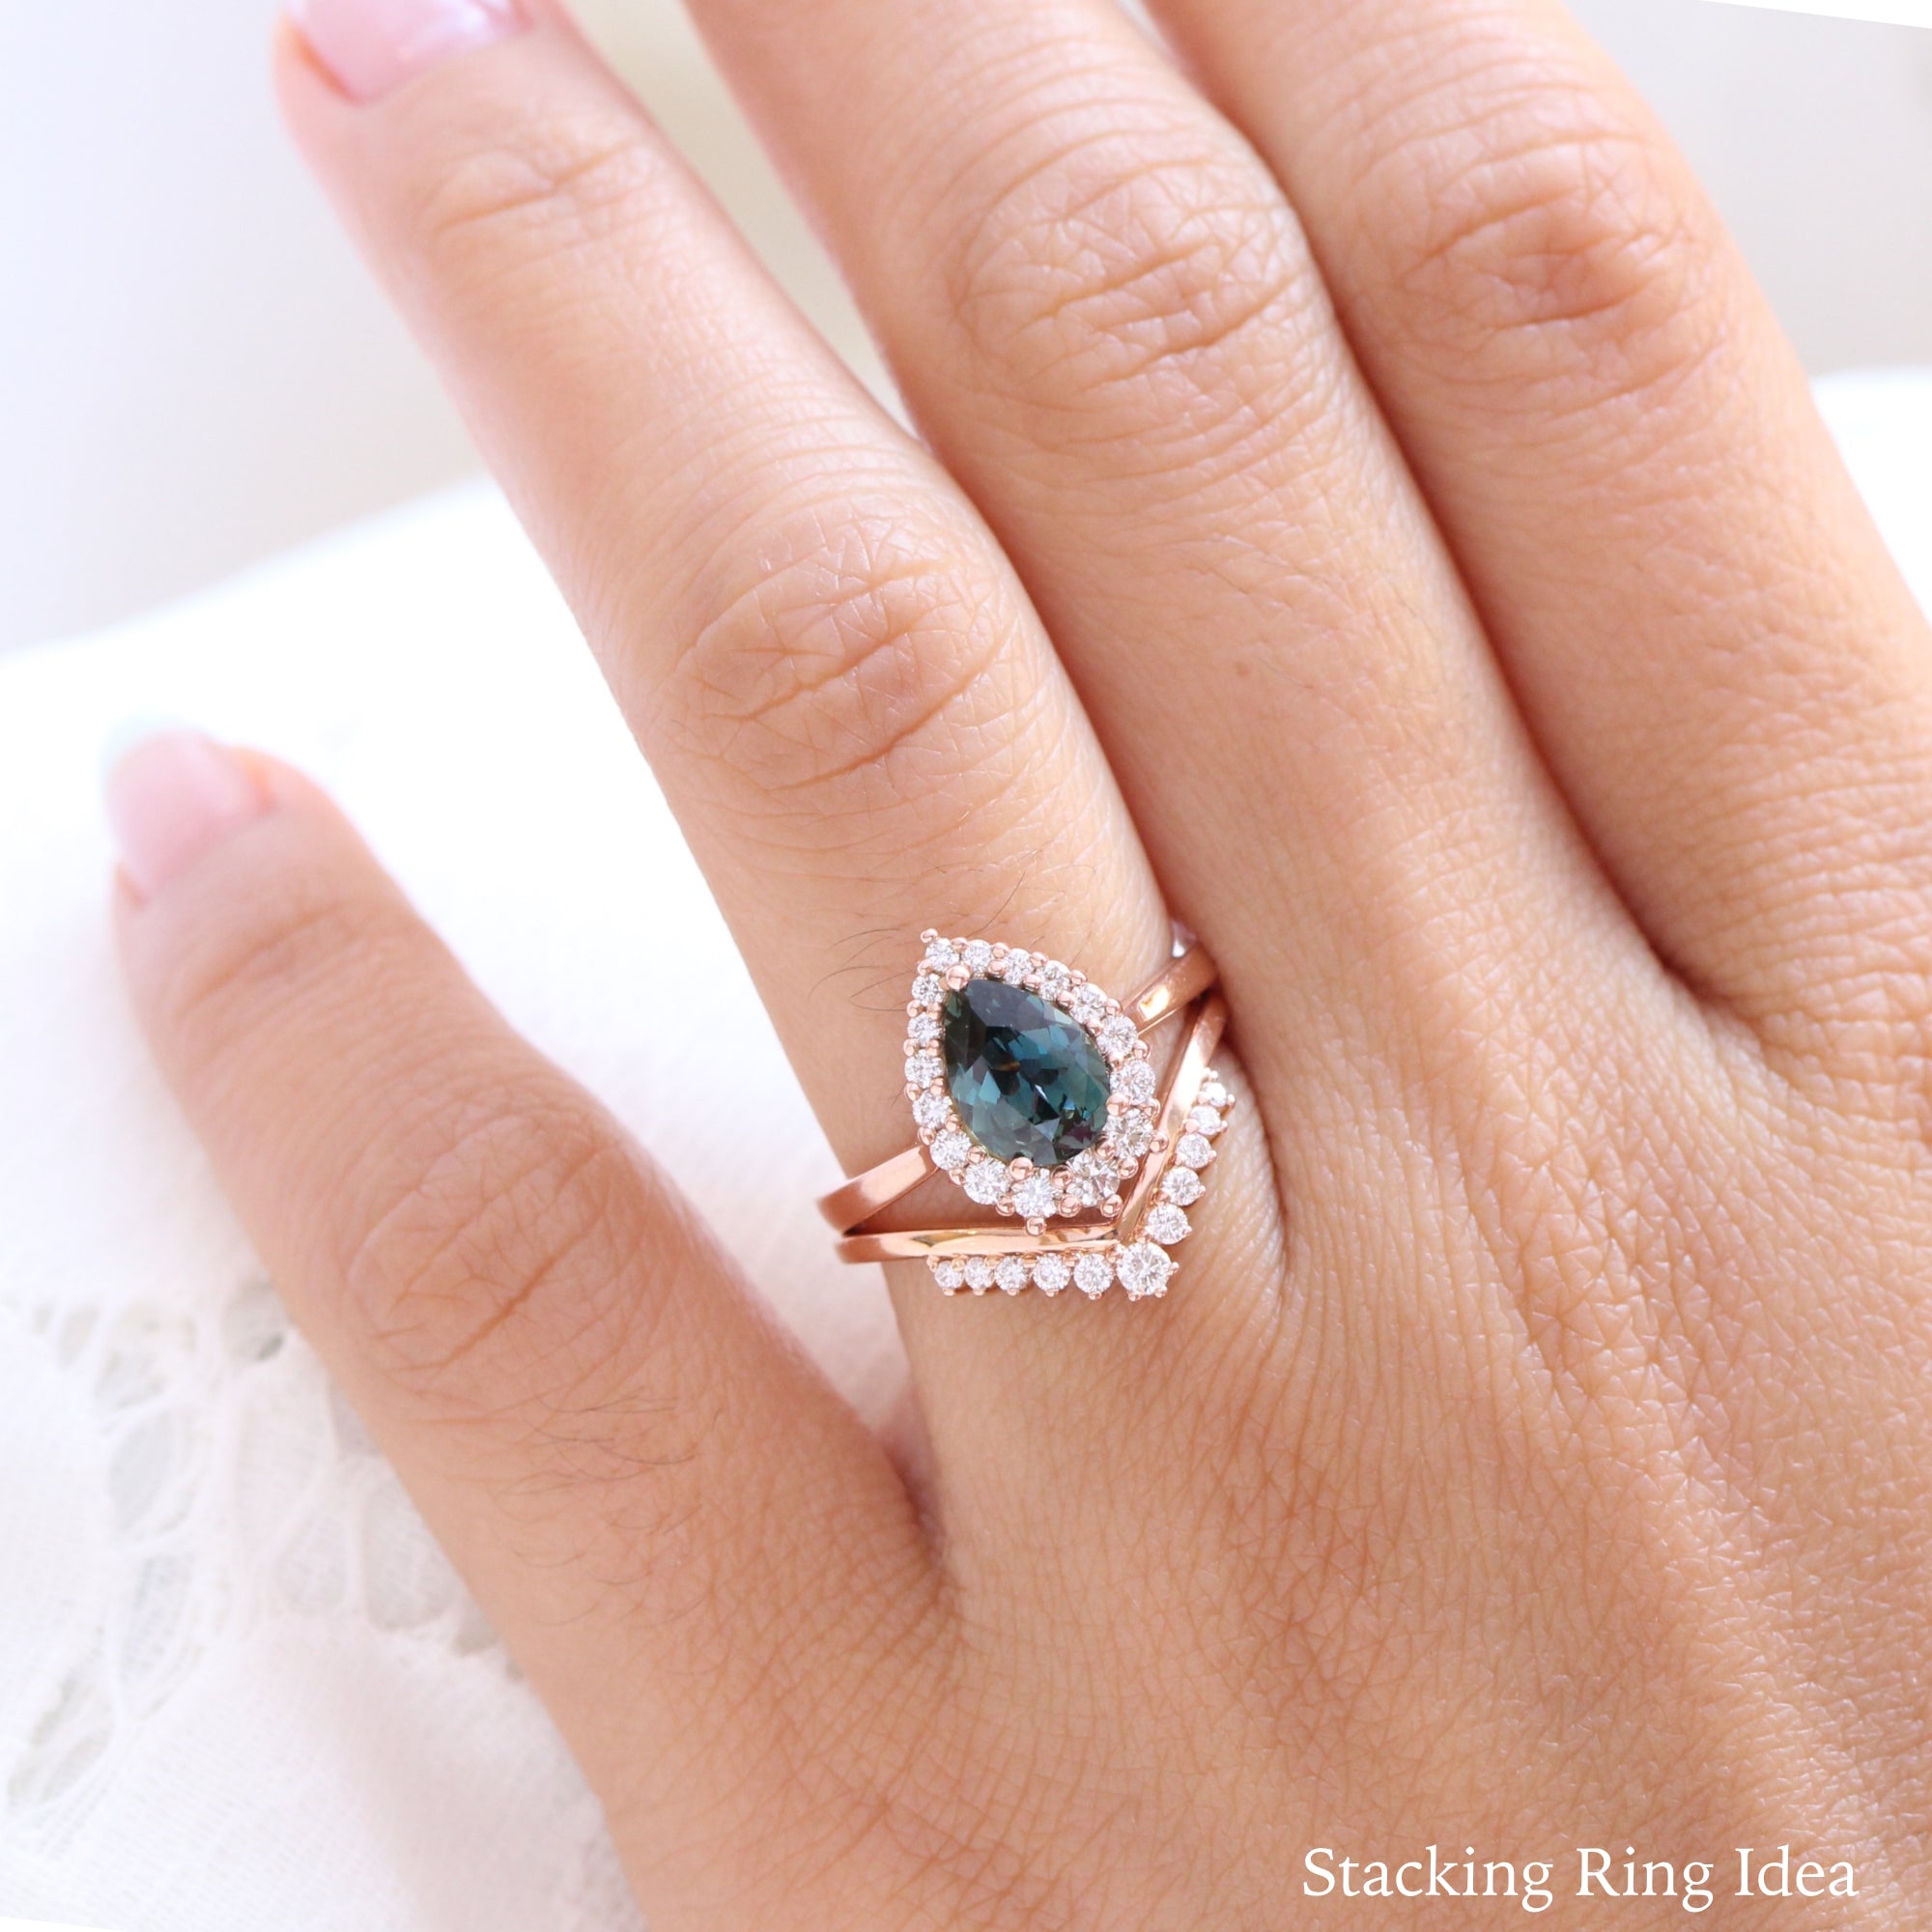 Teal green sapphire ring rose gold halo diamond pear engagement ring la more design jewelry